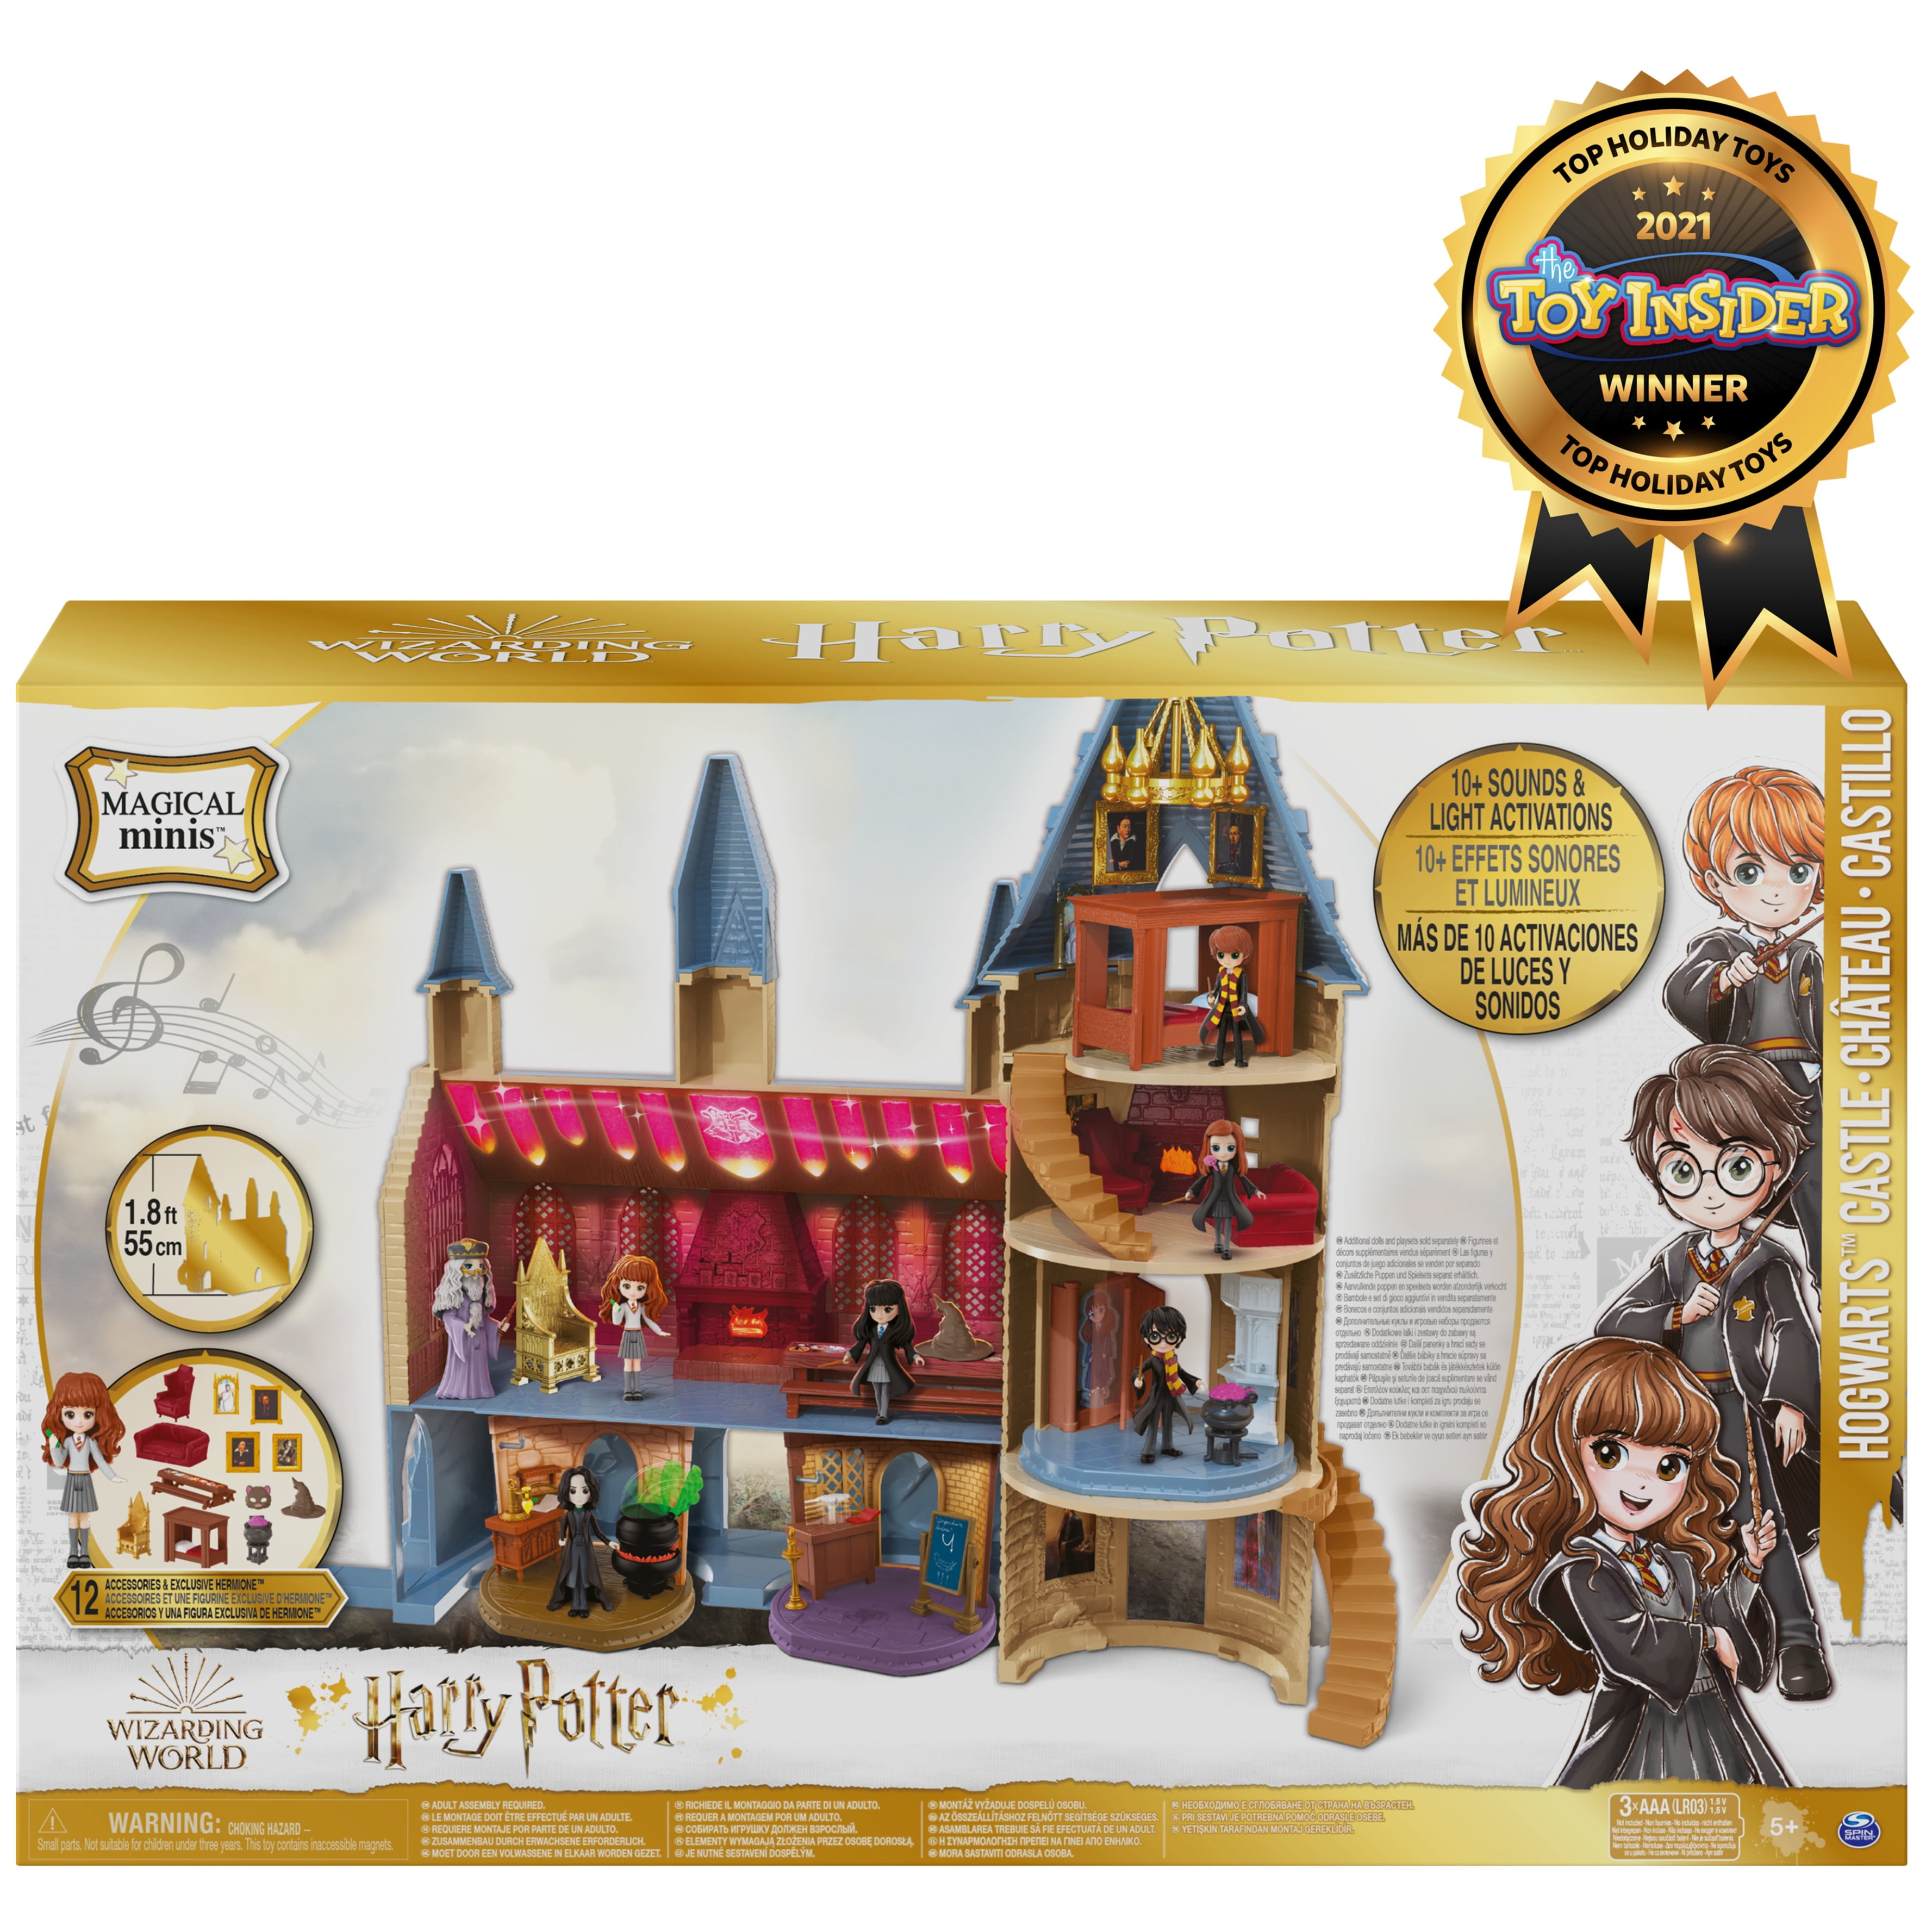  Harry Potter Hogwarts Great Hall Mini Playset with 5  Interactive Features, 4 Mini Figures, Podium, Goblet, Plus Works with  Wizard Training Wands (Sold Separately) : Toys & Games